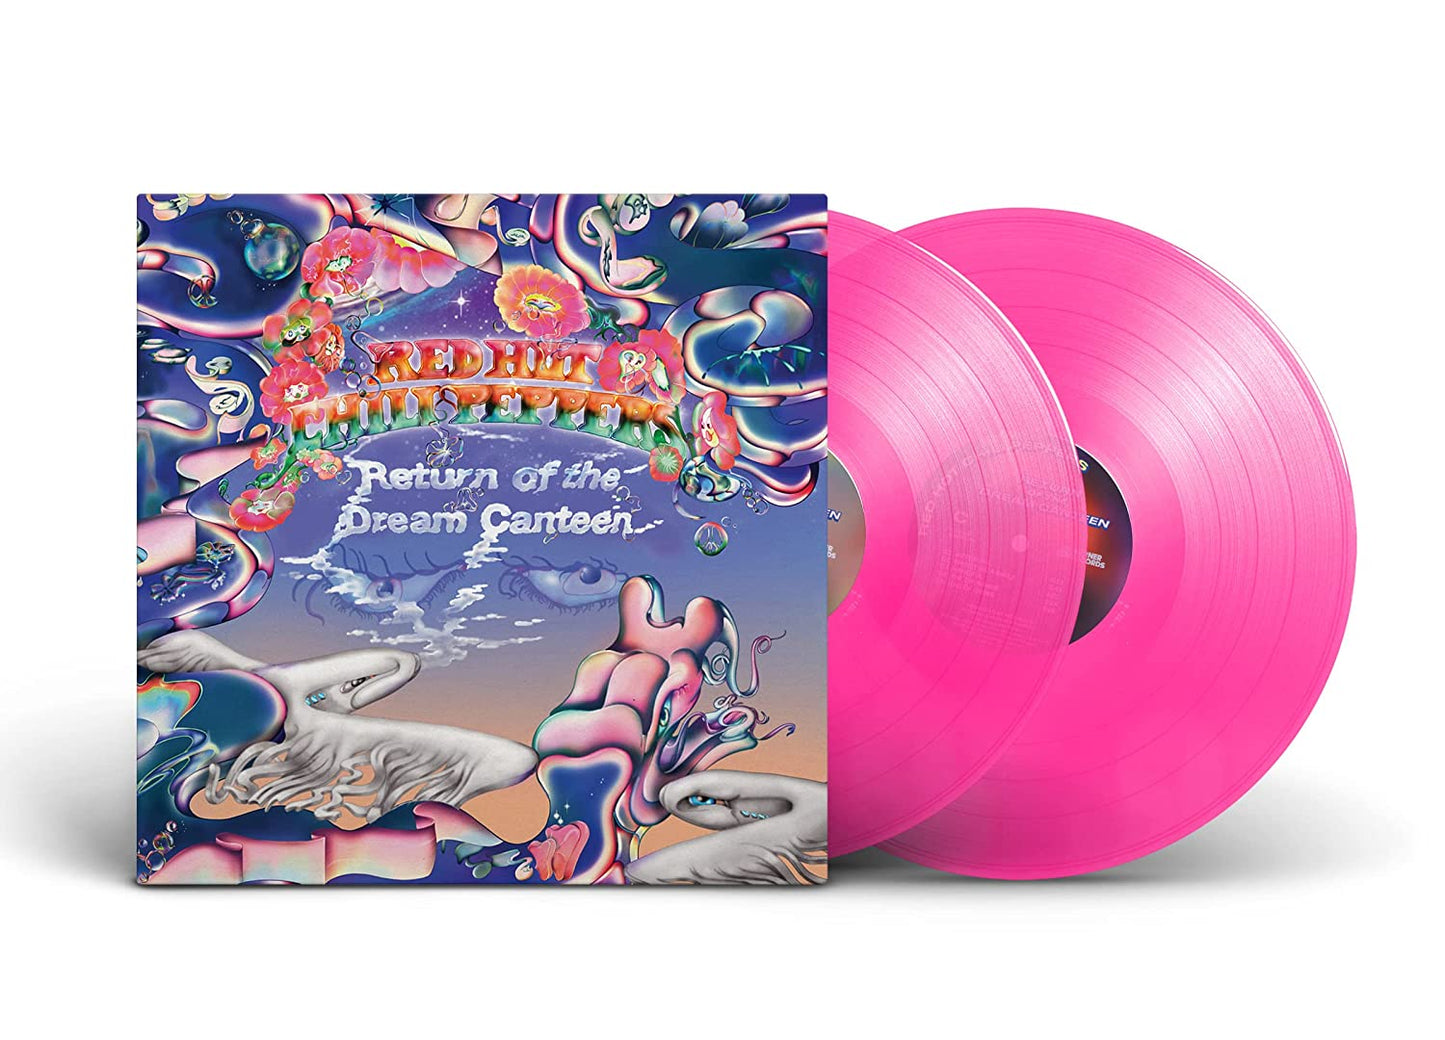 Return of the Dream Canteen - Red Hot Chili Peppers Vinyl (Neon Pink)